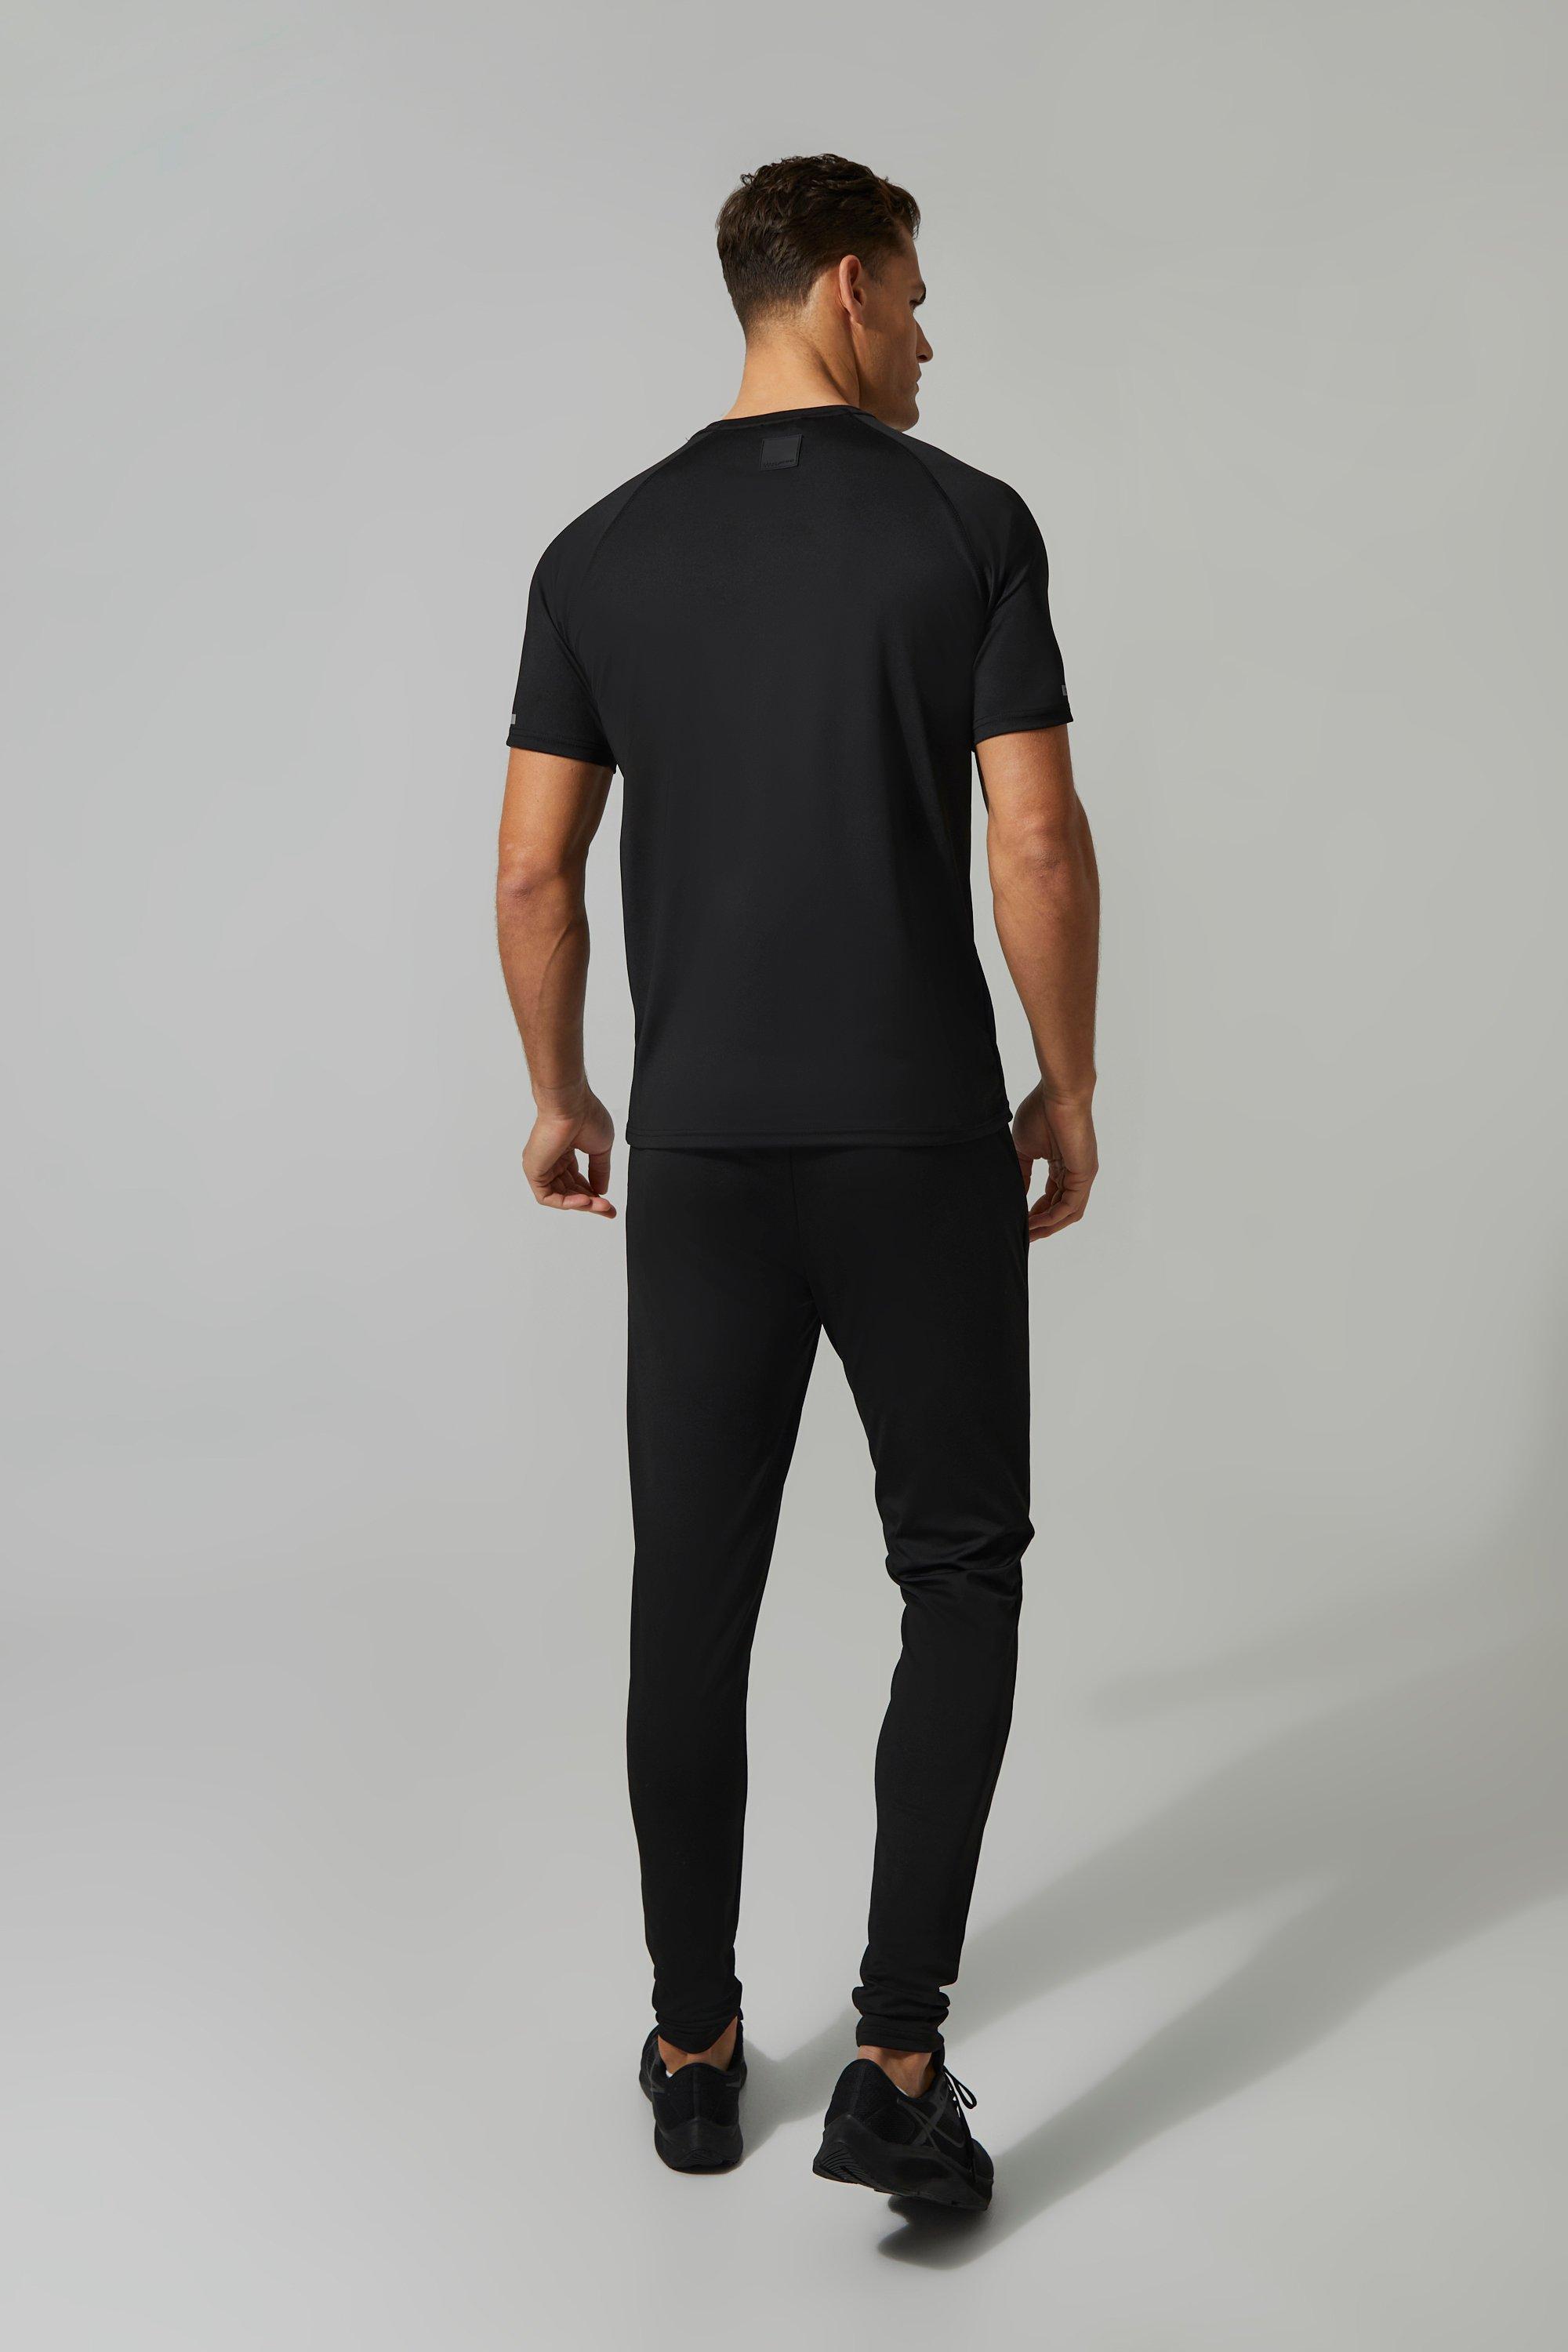 BoohooMAN Tall Man Active T-shirt Jogger Tracksuit in Black for Men | Lyst